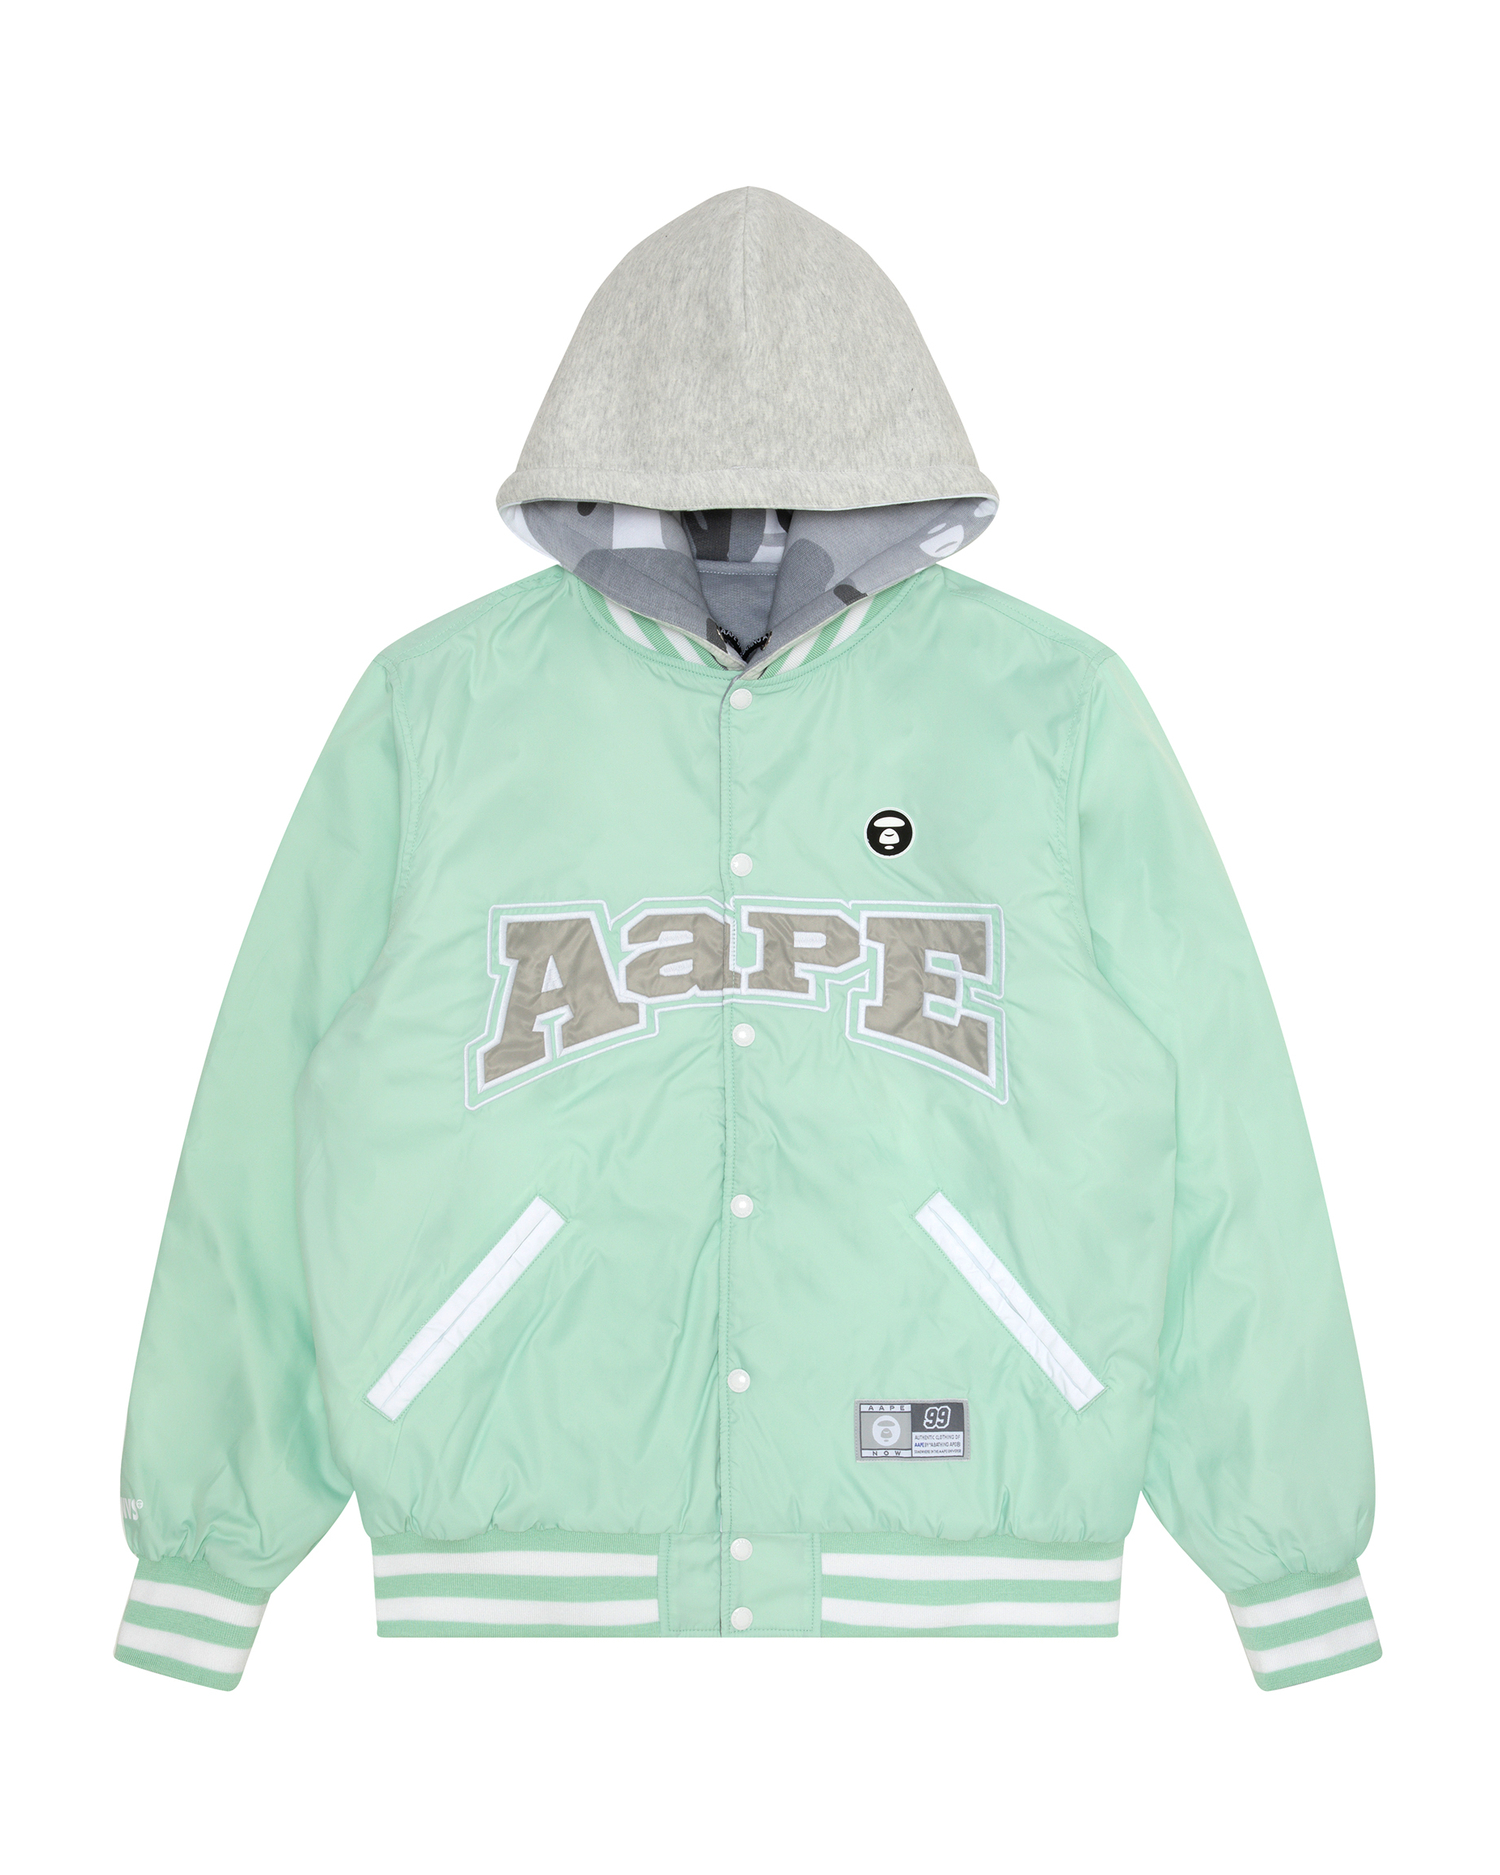 Moonface reversible hooded snap-button jacket